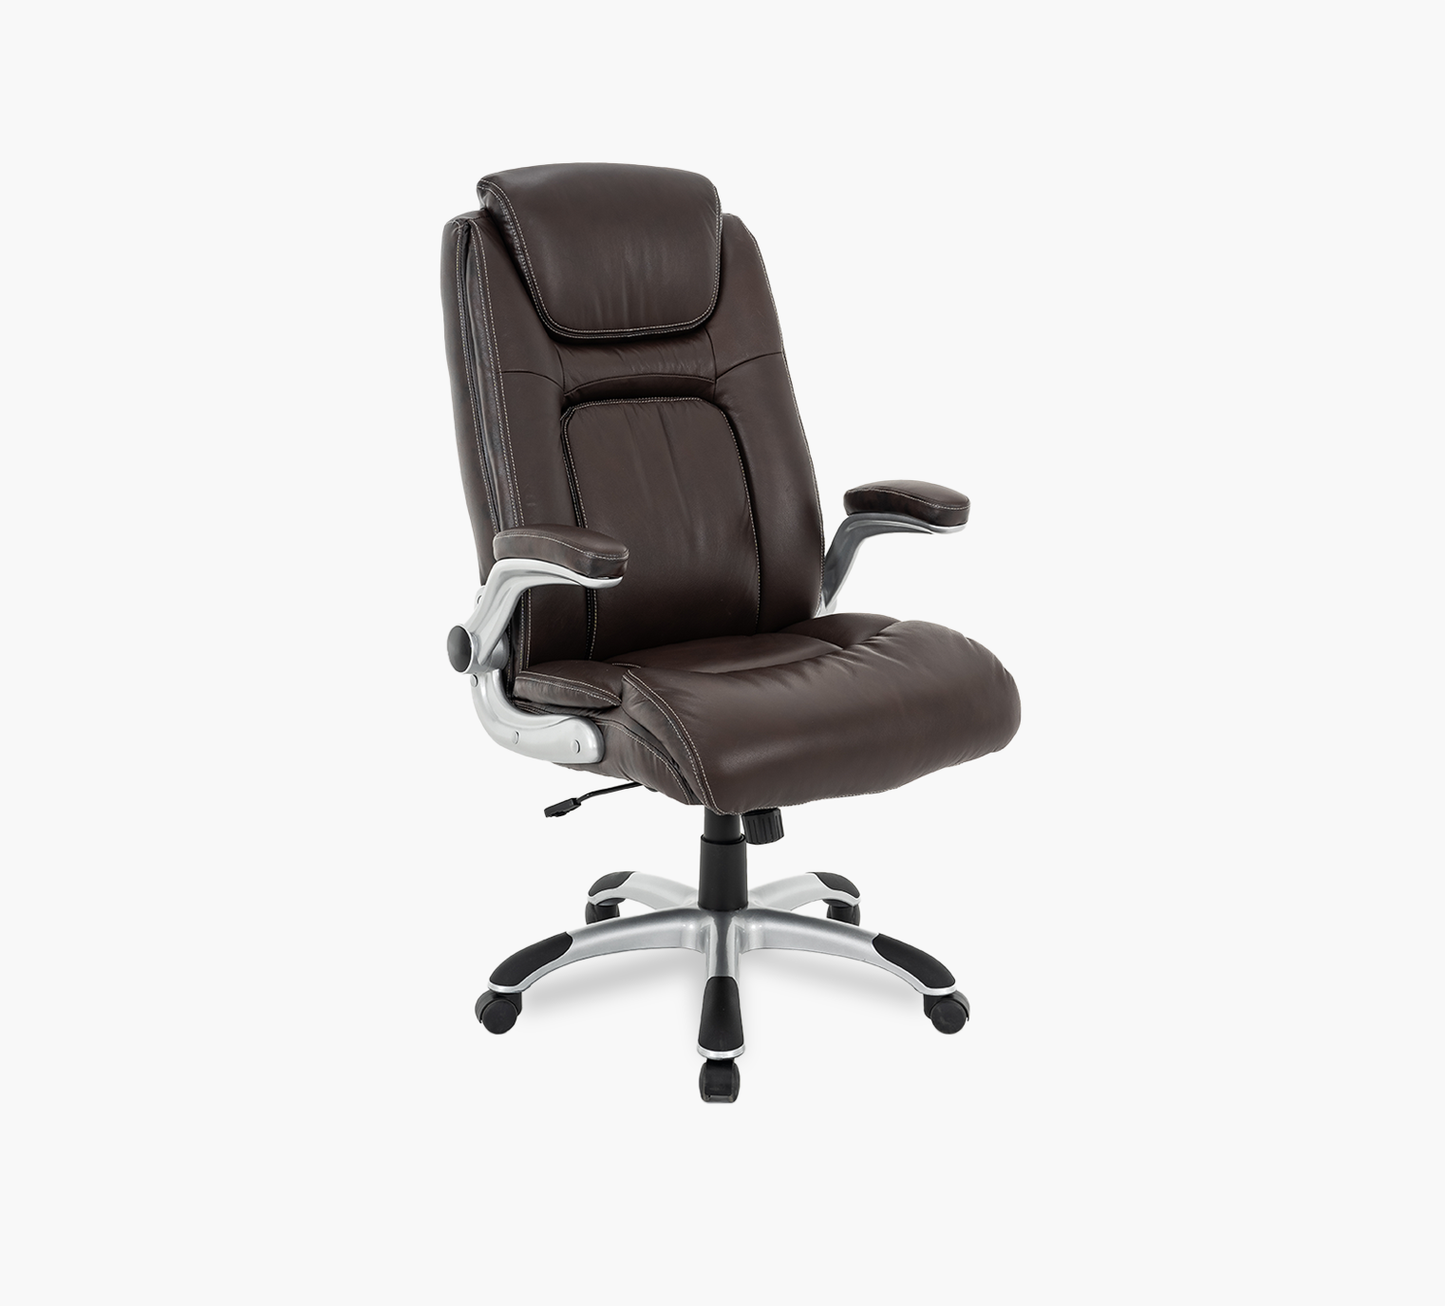 Andrew Swivel Leather Desk Chair